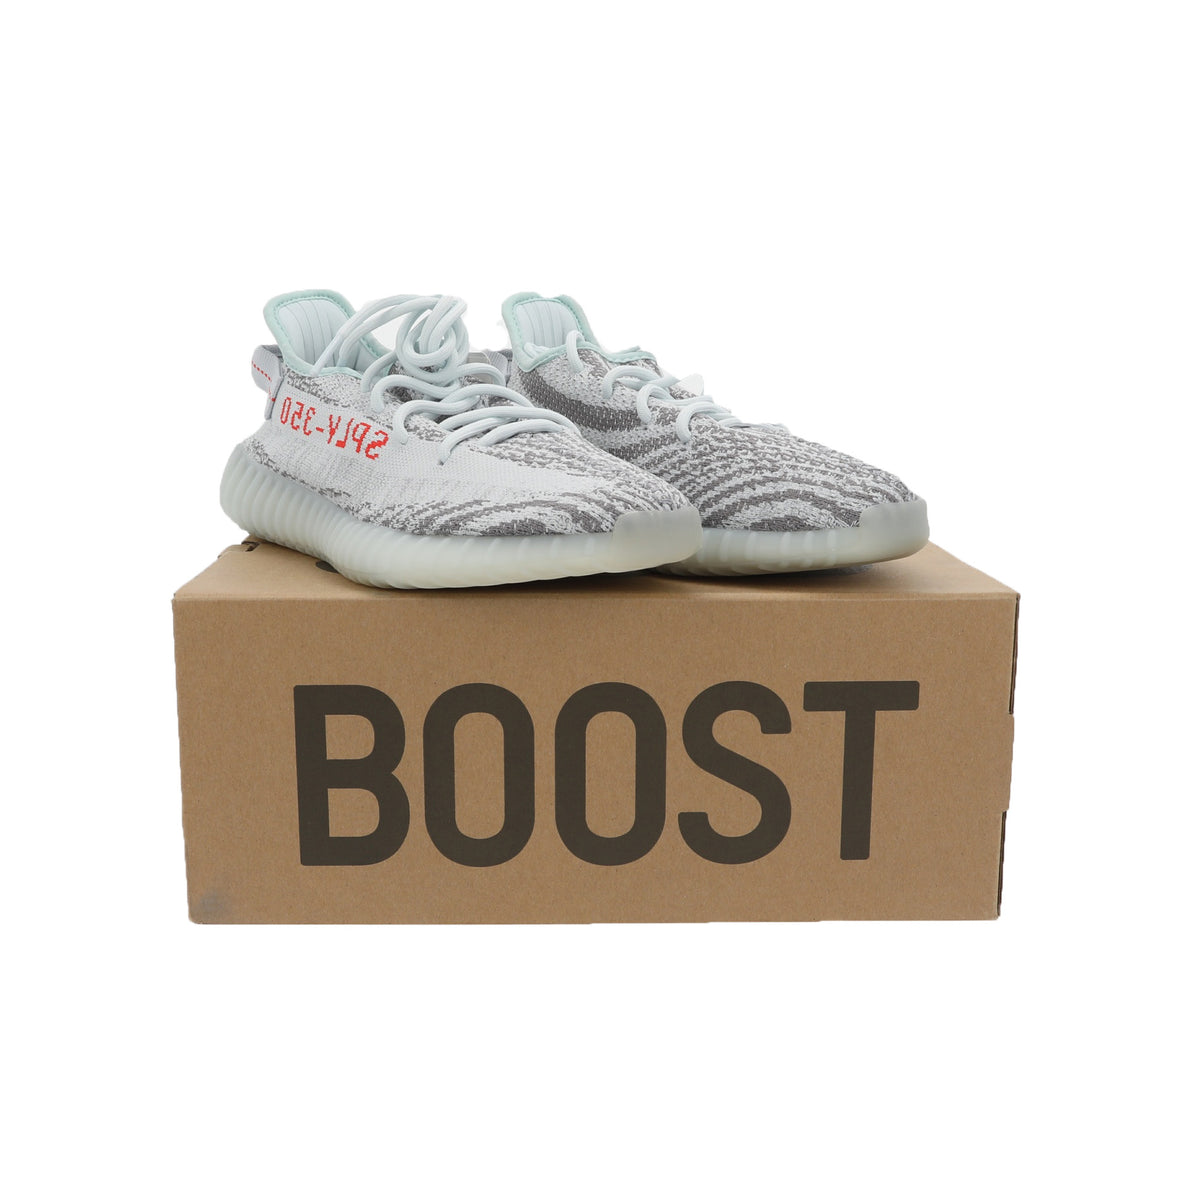 Distrahere vision kuffert adidas Yeezy Boost 350 V2 Blue Tint US 9 – Fancy Lux